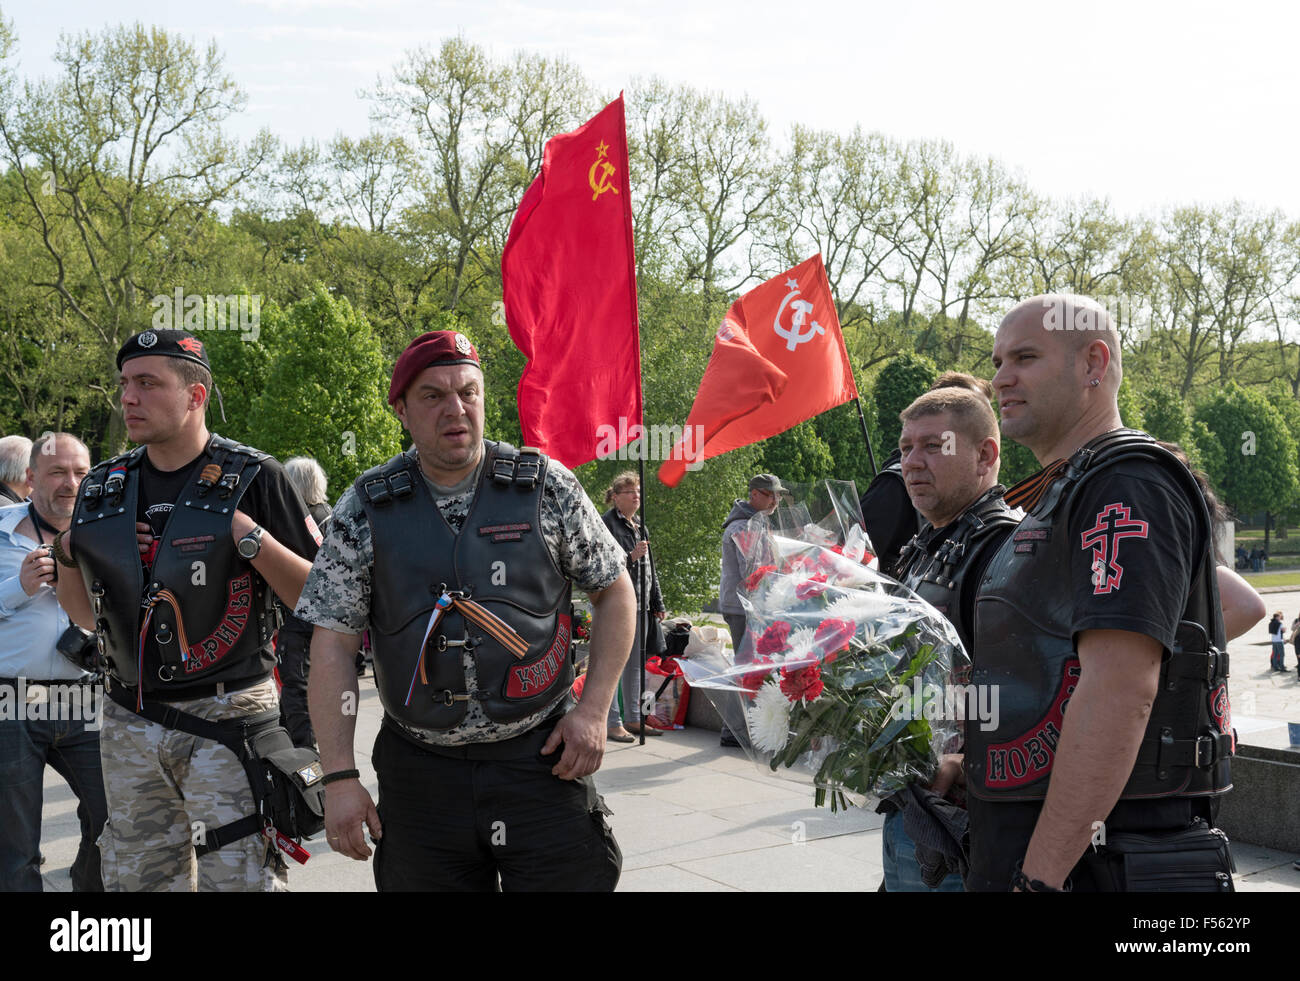 '09.05.2015, Berlin, Berlin, Germany - Soviet War Memorial Treptow, the 70th anniversary of the end of World War II that 9 May is considered in Russia as Victory Day over Nazi Germany, members of the Russian-nationalist Rocker group ''Nachtwoelfe'' Motorcycle Club, in the background Flag of the former Soviet Union. EBS150509D503CAROEX.JPG - NOT for SALE in G E R M A N Y, A U S T R I A, S W I T Z E R L A N D [MODEL RELEASE: NO, PROPERTY RELEASE: NO (c) caro photo agency / Schulz, http://www.caro-images.pl, info@carofoto.pl - In case of using the picture for non-journalistic purposes, please con Stock Photo